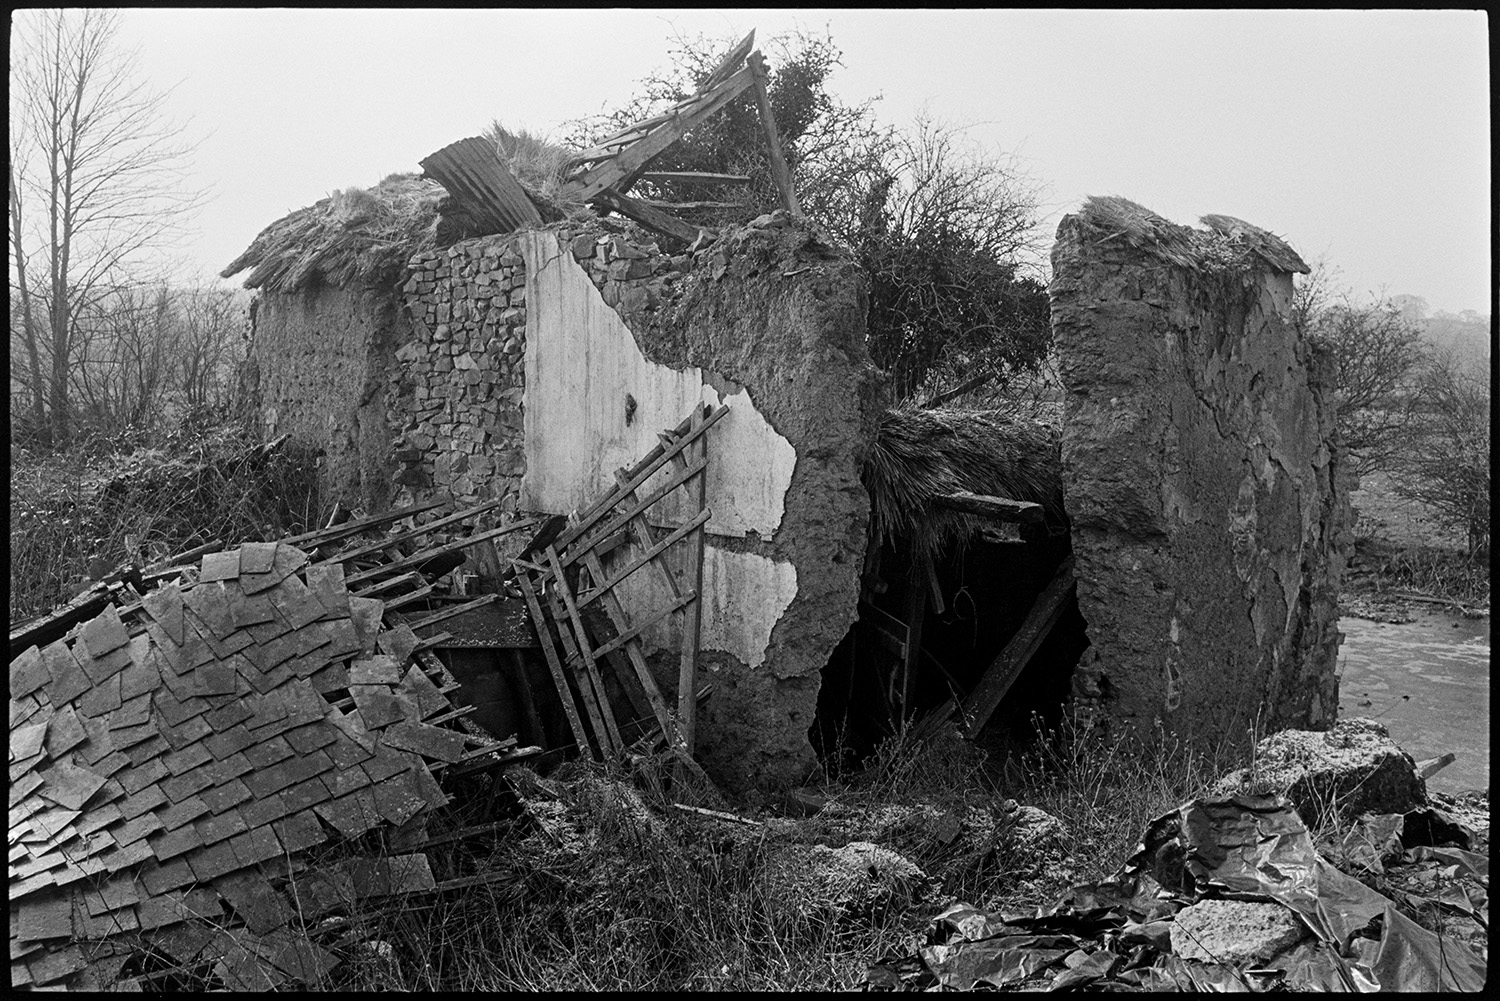 Ruined cob and thatch barns, flooded stream. 
[A collapsing cob and thatched barn in a field at Middle Week, Iddesleigh. Part of a slate roof is also on the ground in front of the barn.]